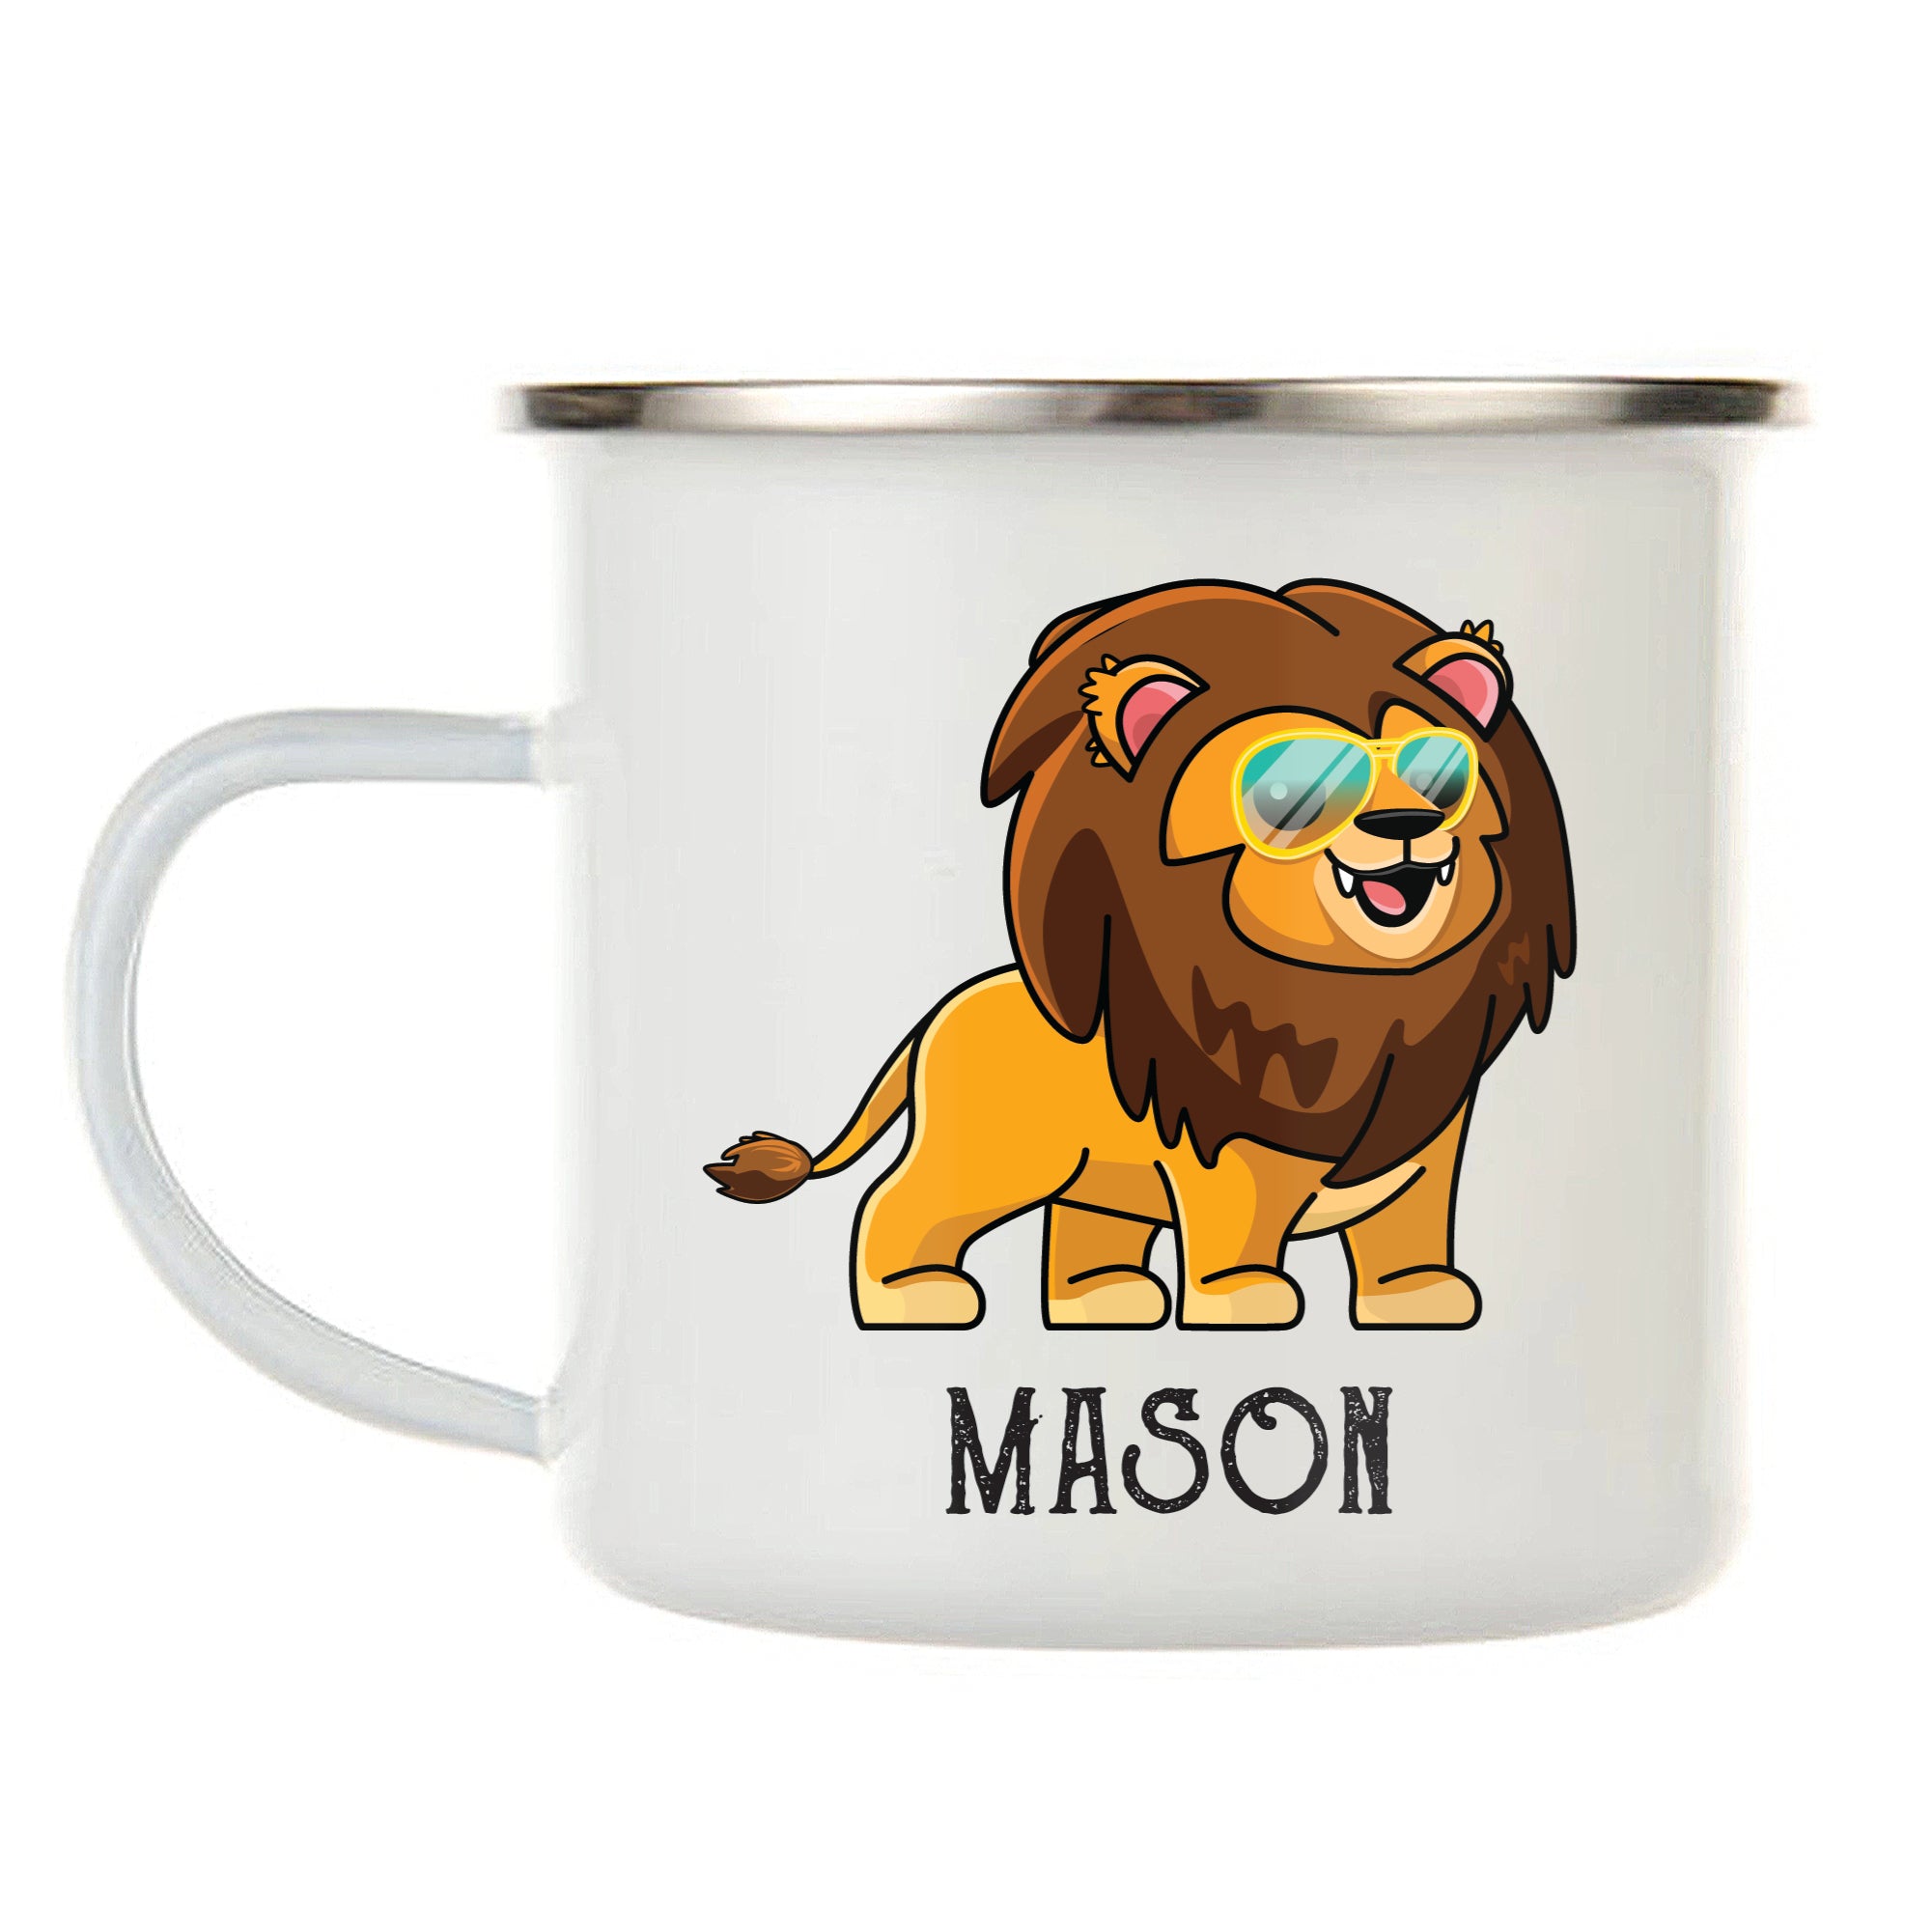 Kids Personalized 12 oz. Stainless Steel & Enamel Camp Mug with Cool Lion